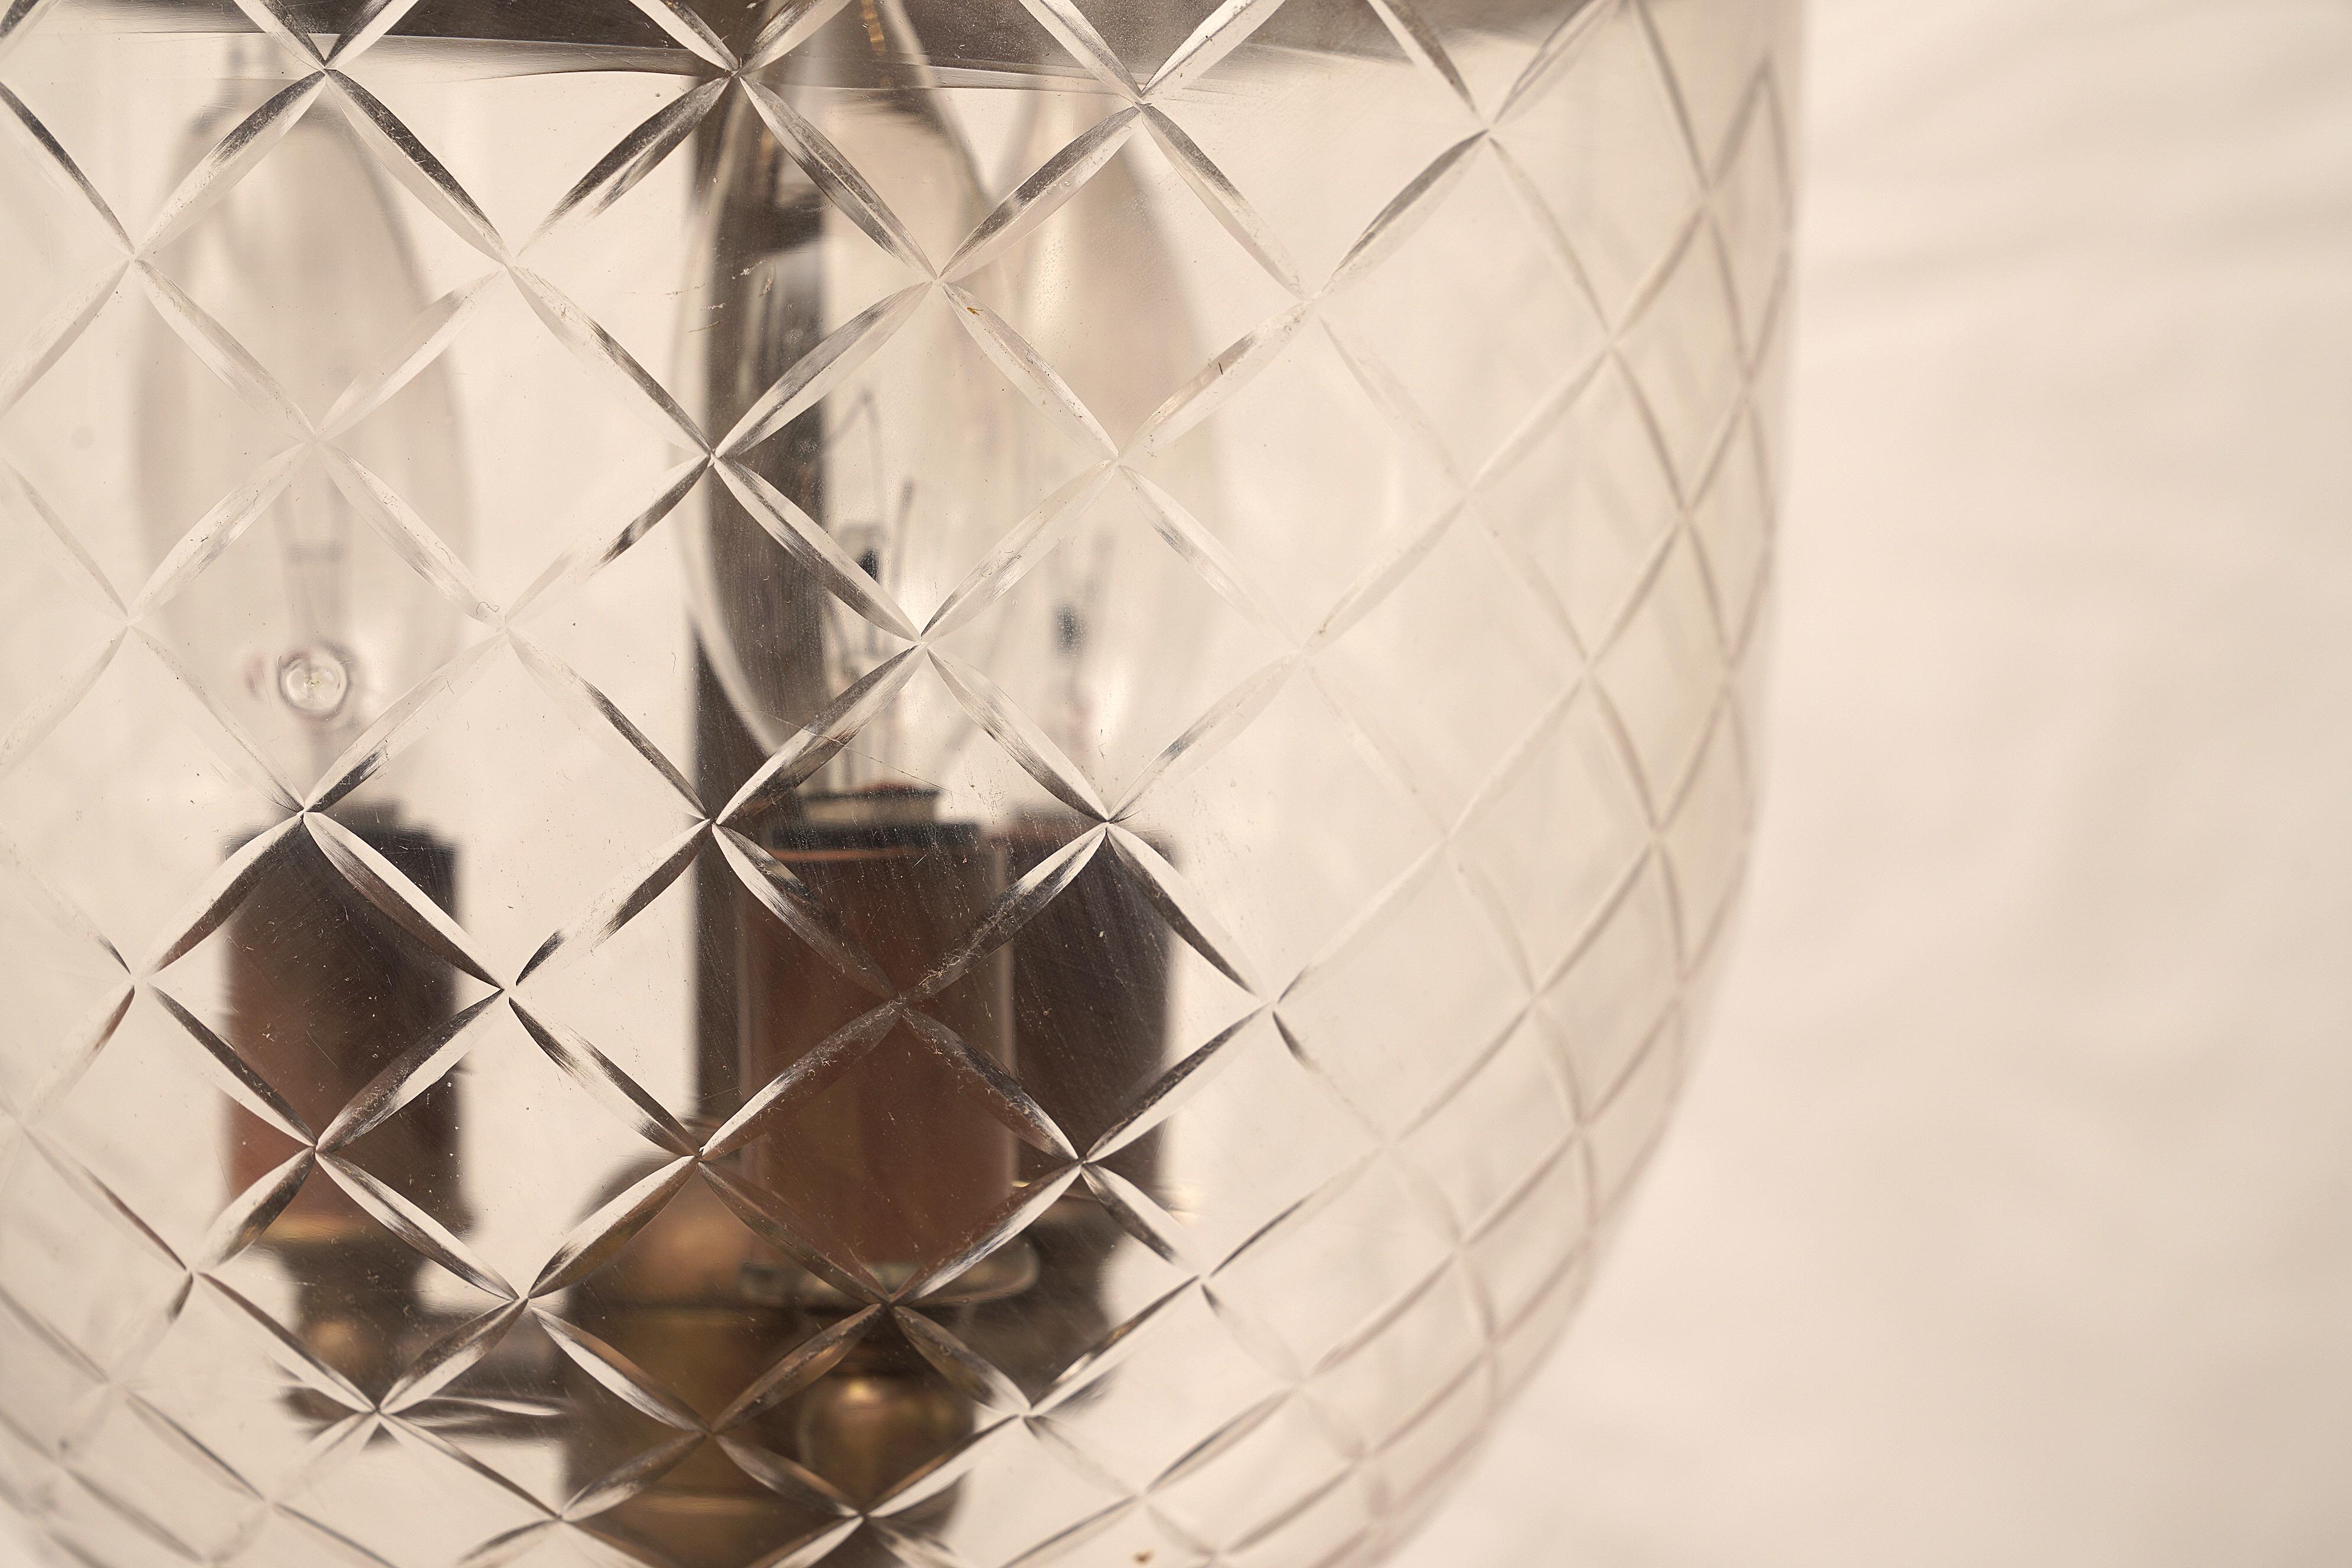 Handblown glass bell jar lantern with a prismatic diamond design etching, complete with the smoke bell lid. Originally used with candles, the lid kept the flame from scorching the ceiling. Embossed brass band with griffin hooks with natural patina